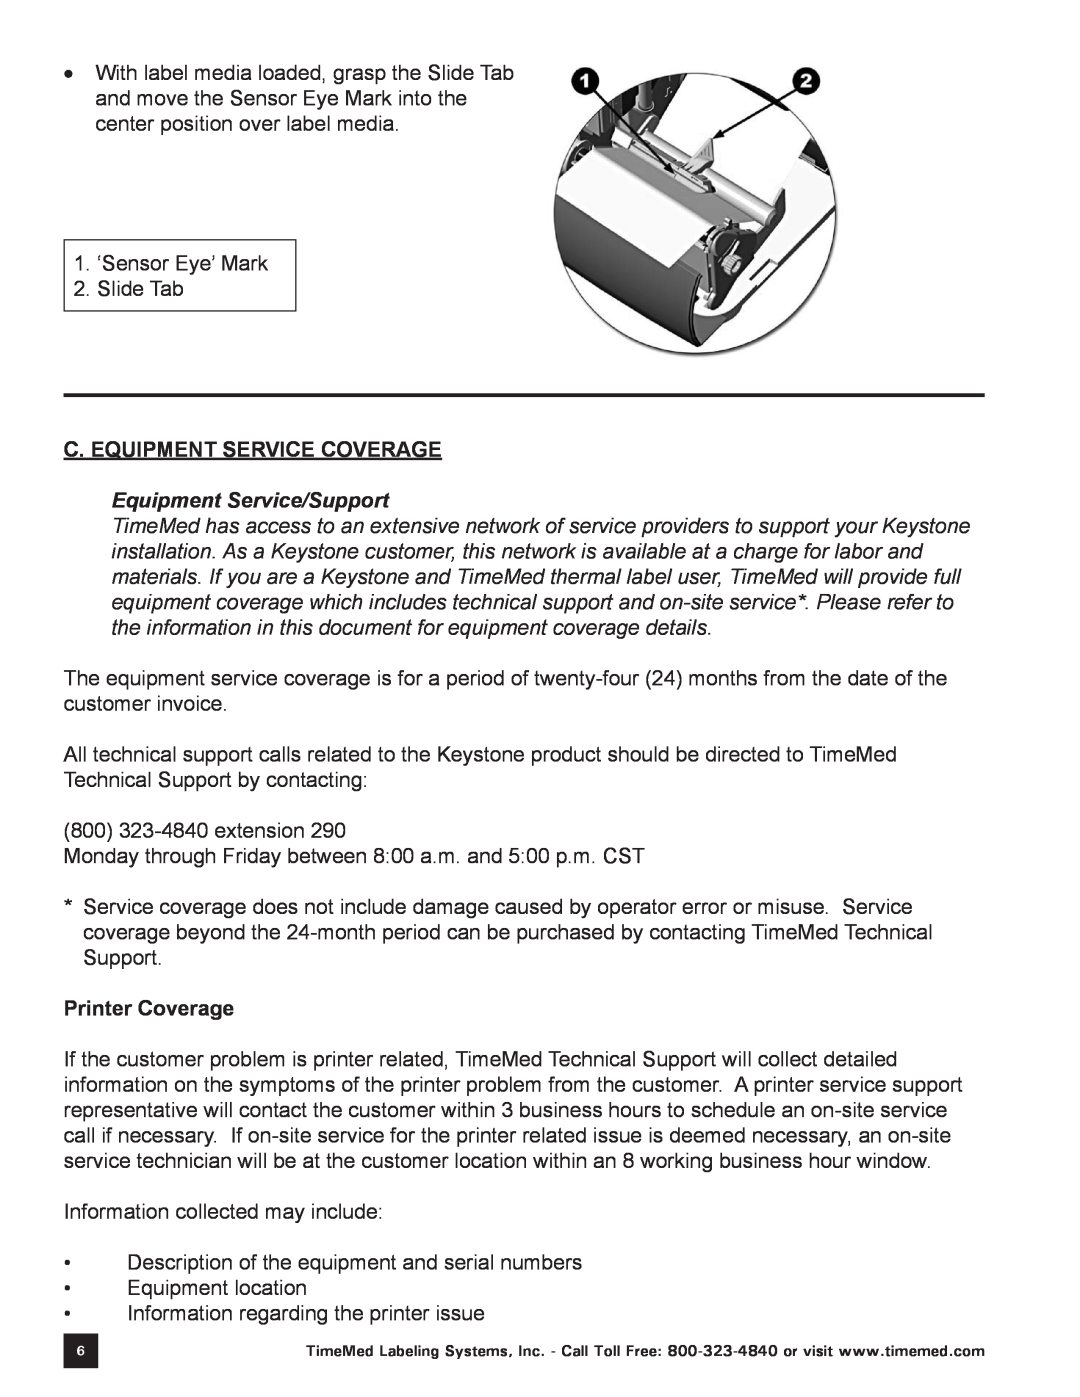 Keystone Computer Keyboard manual C. Equipment Service Coverage, Equipment Service/Support, Printer Coverage 